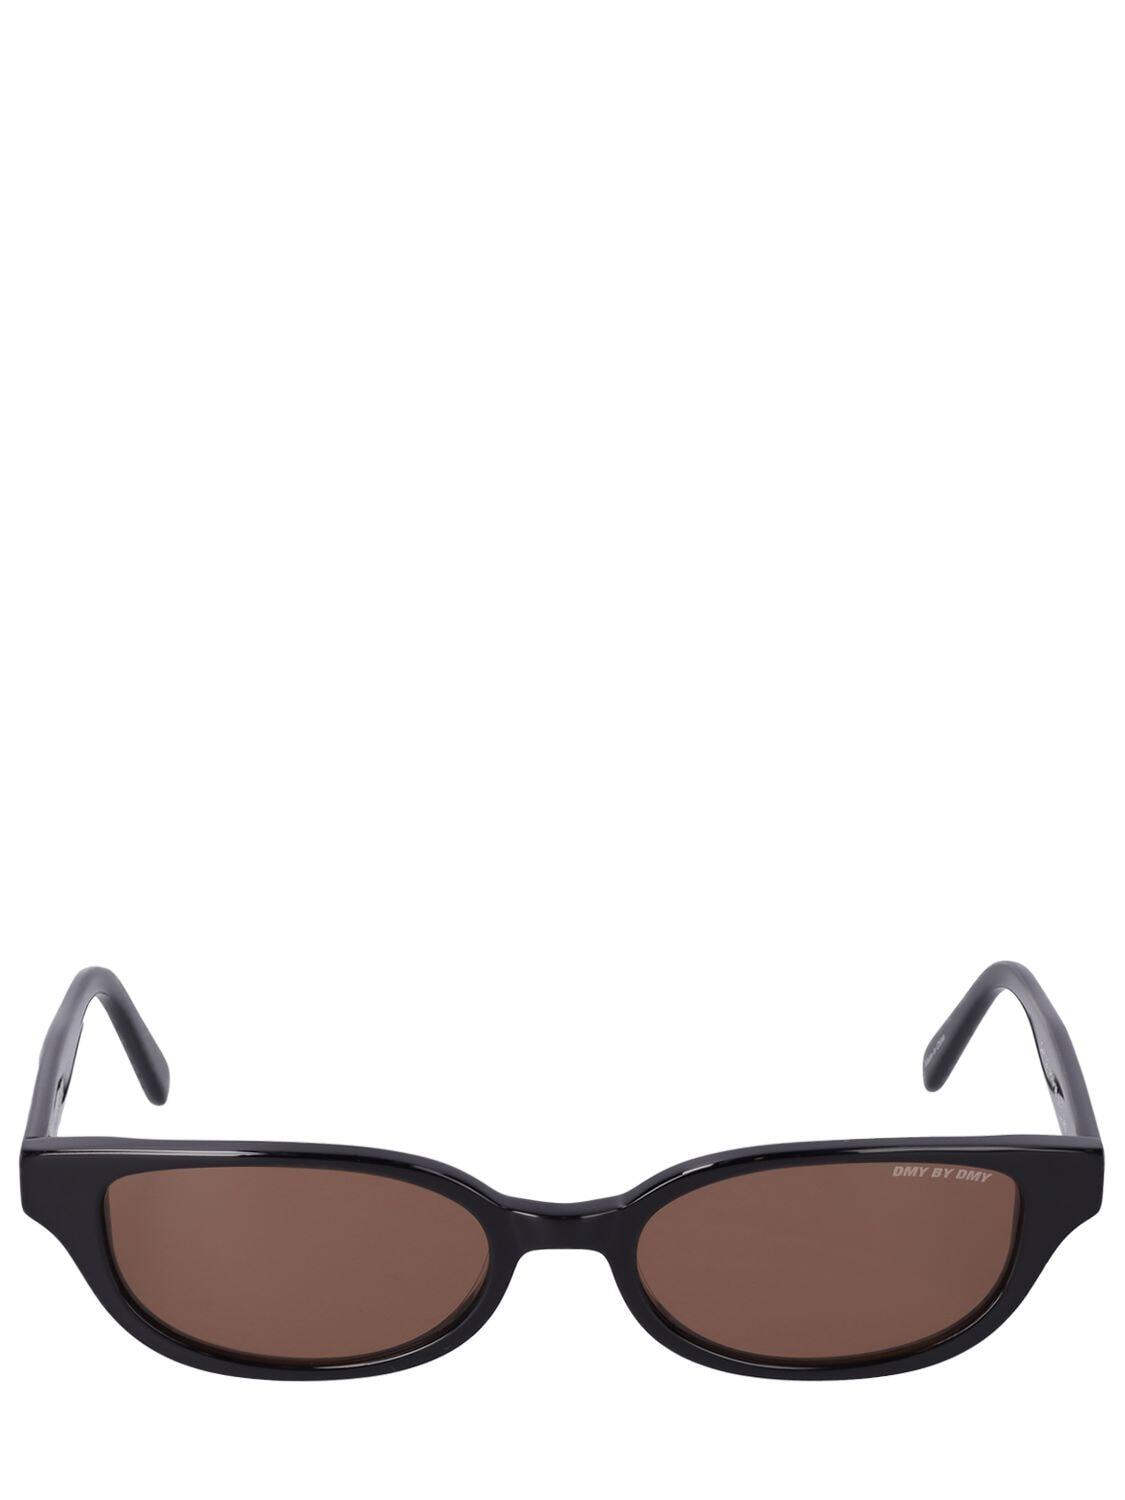 DMY BY DMY Romi Round Acetate Sunglasses in black / brown